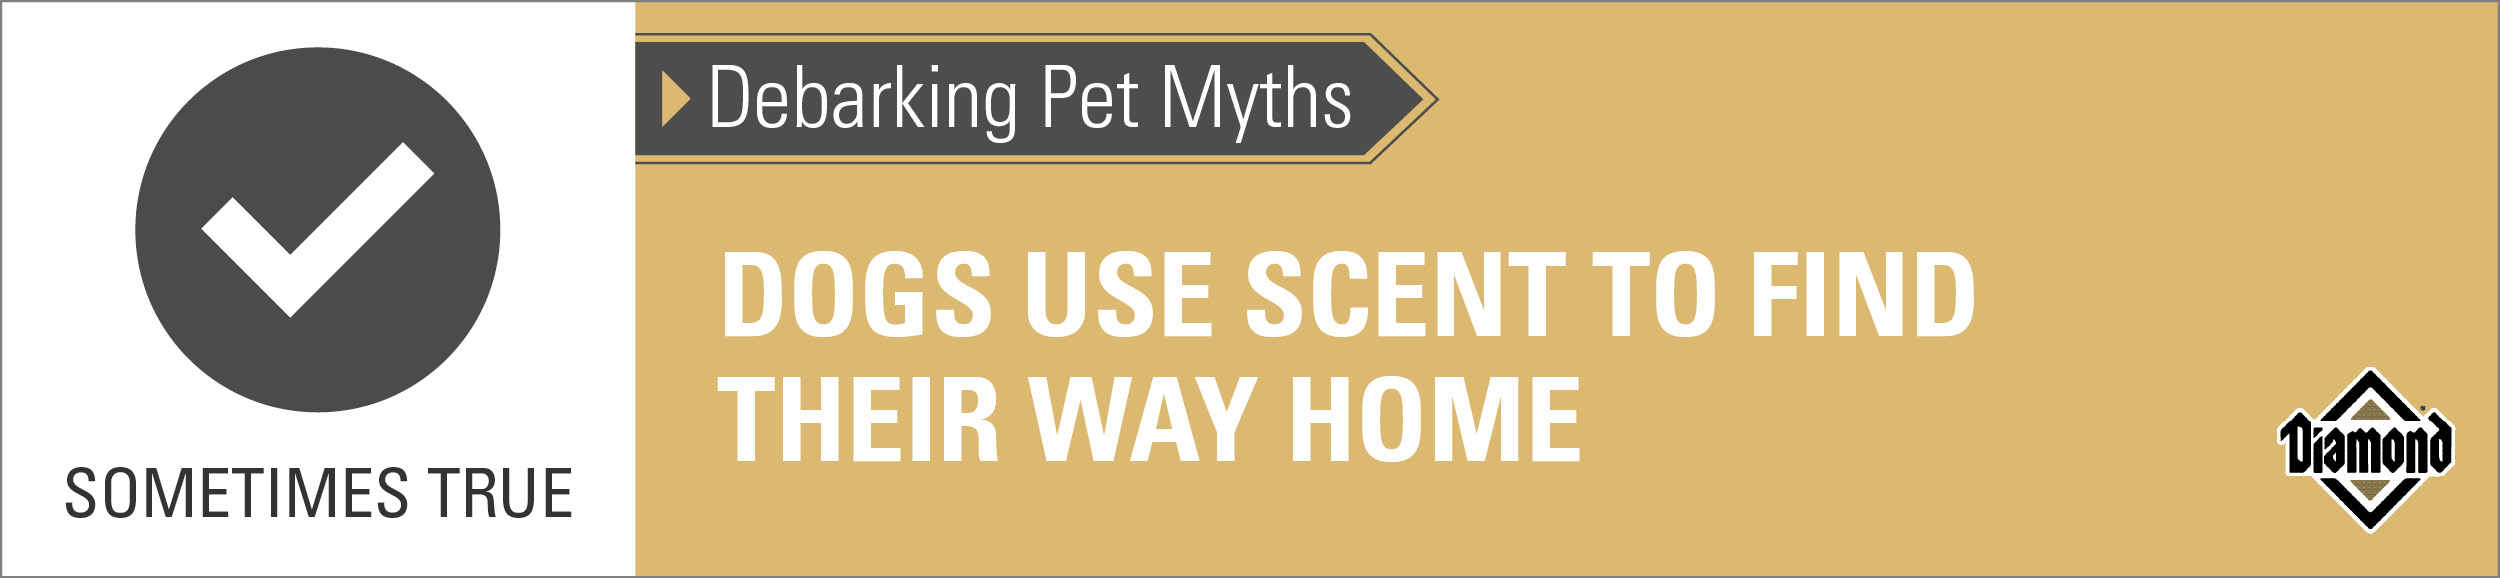 Dogs Use Scent to Find Their Way Home Info Graphic | Diamond Pet Foods